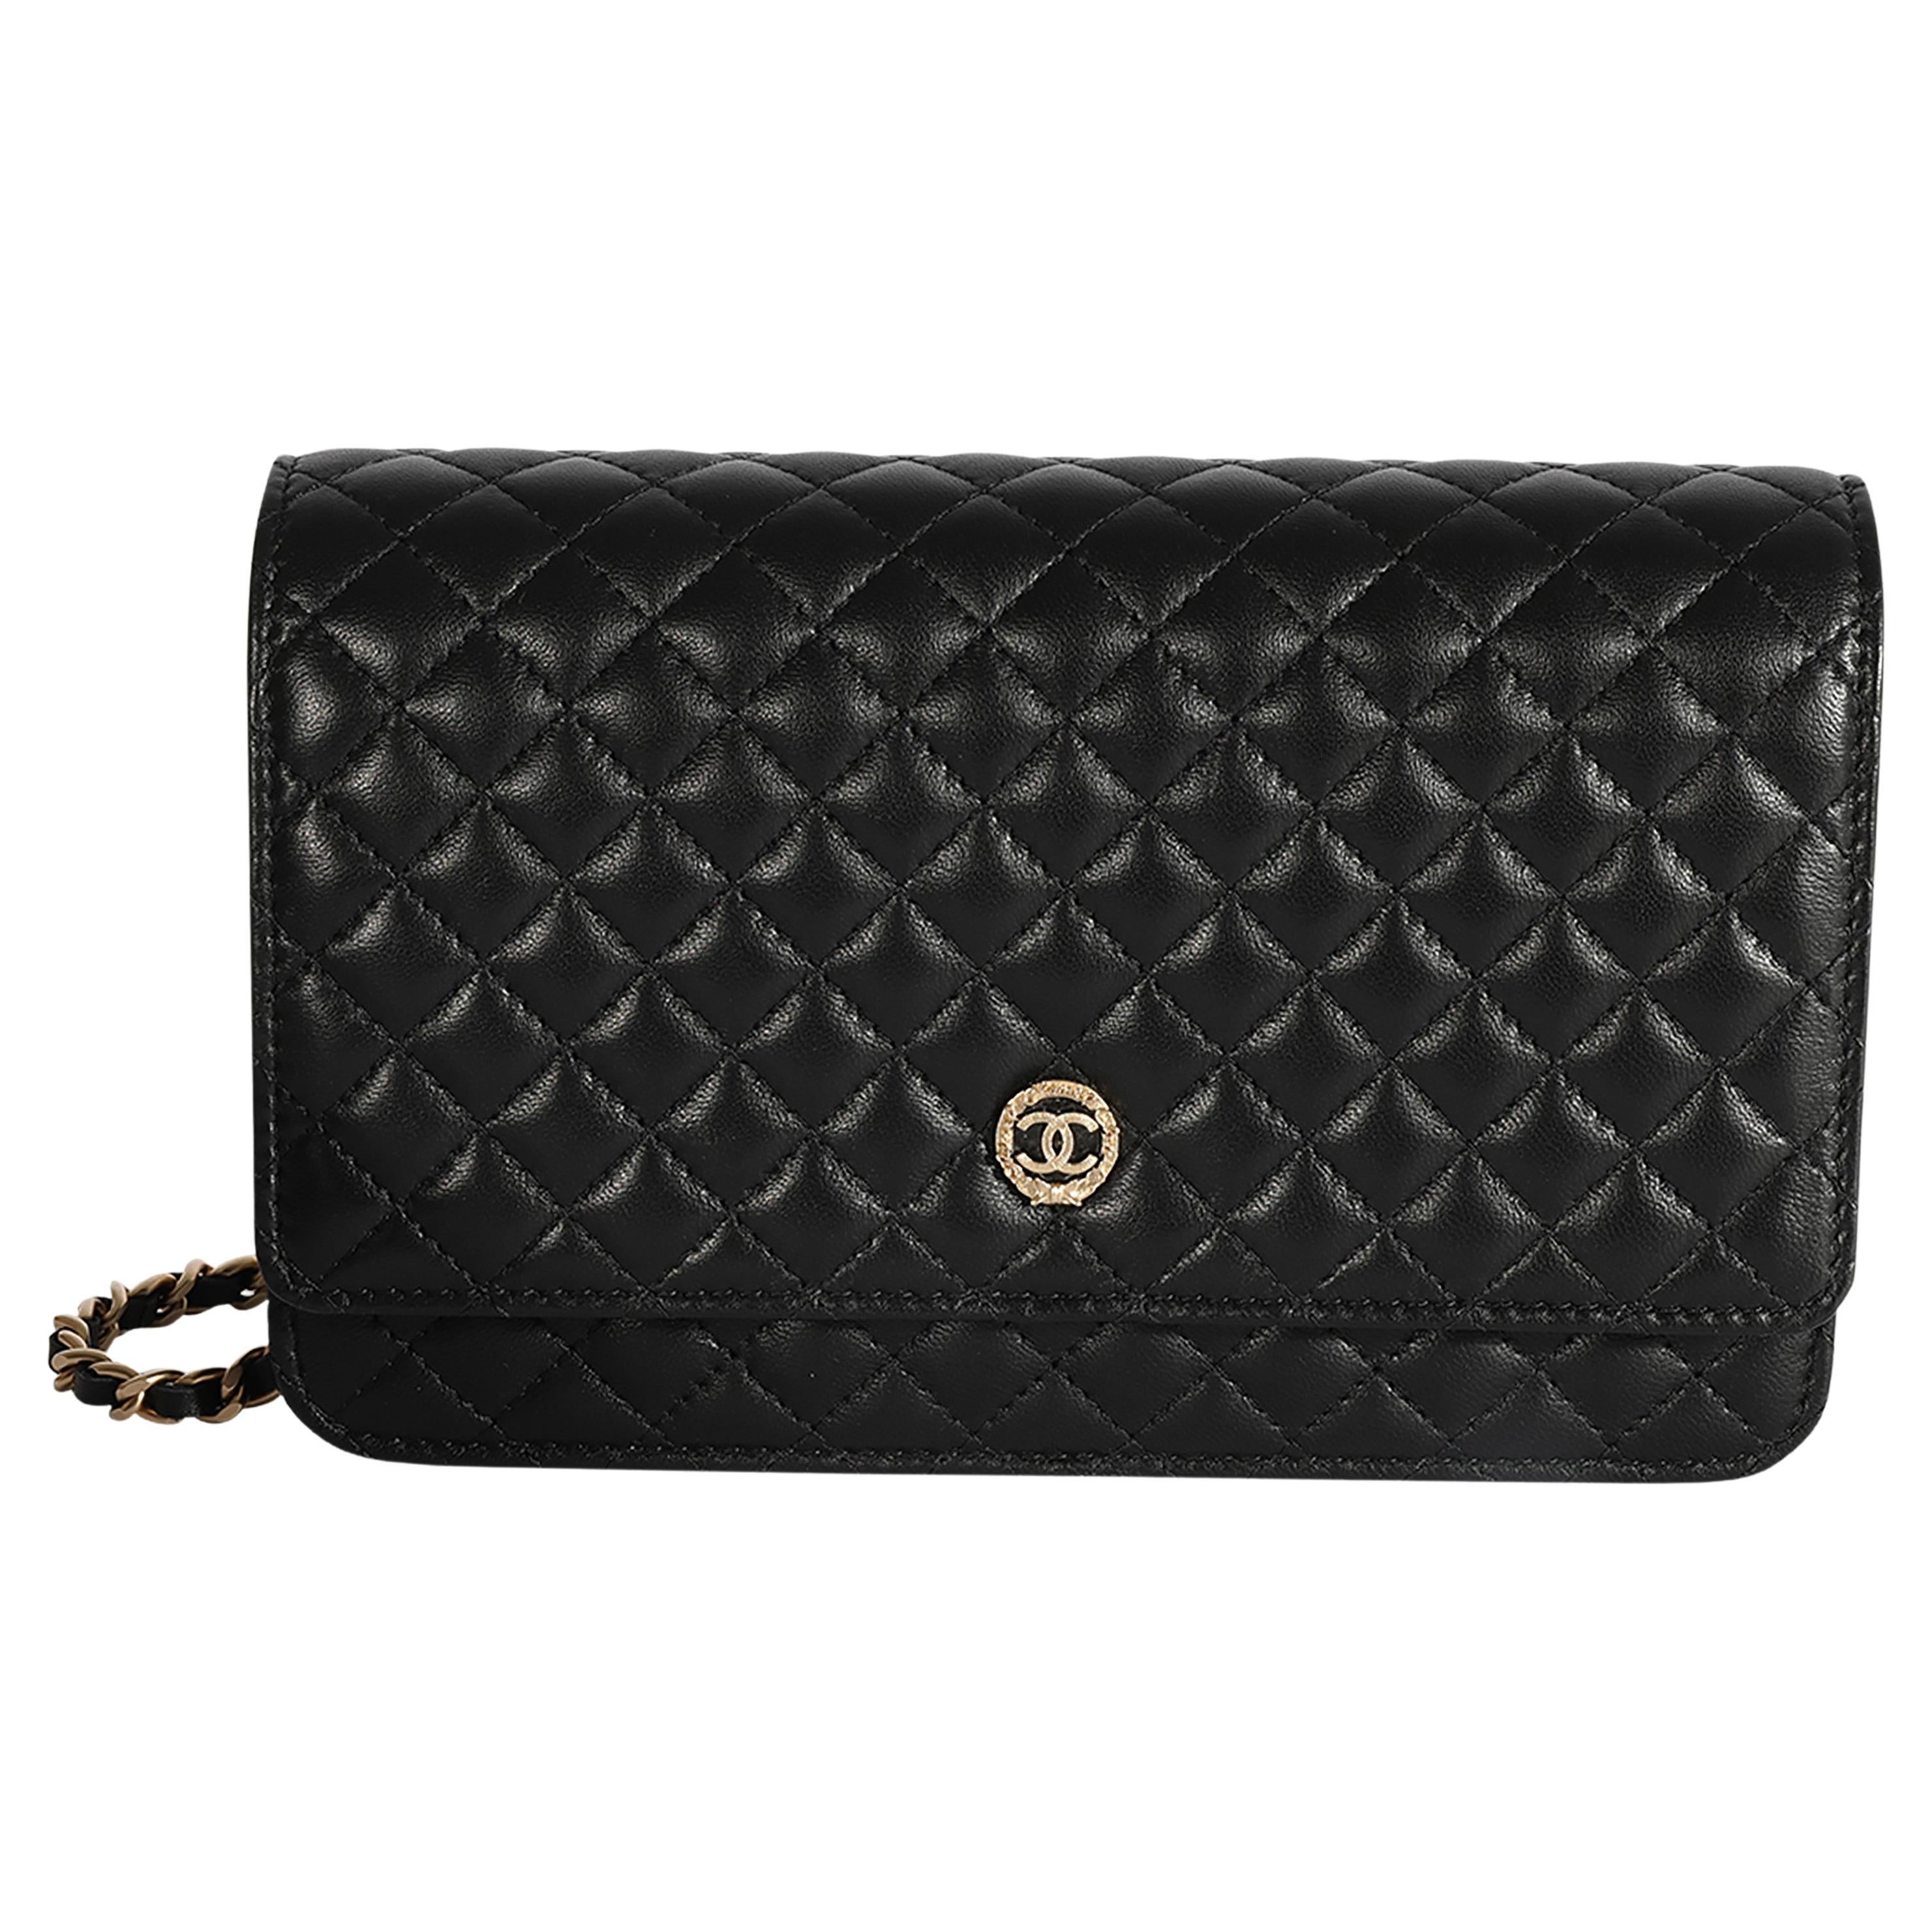 Chanel Black Quilted Lambskin Chanel Crest Wallet On Chain